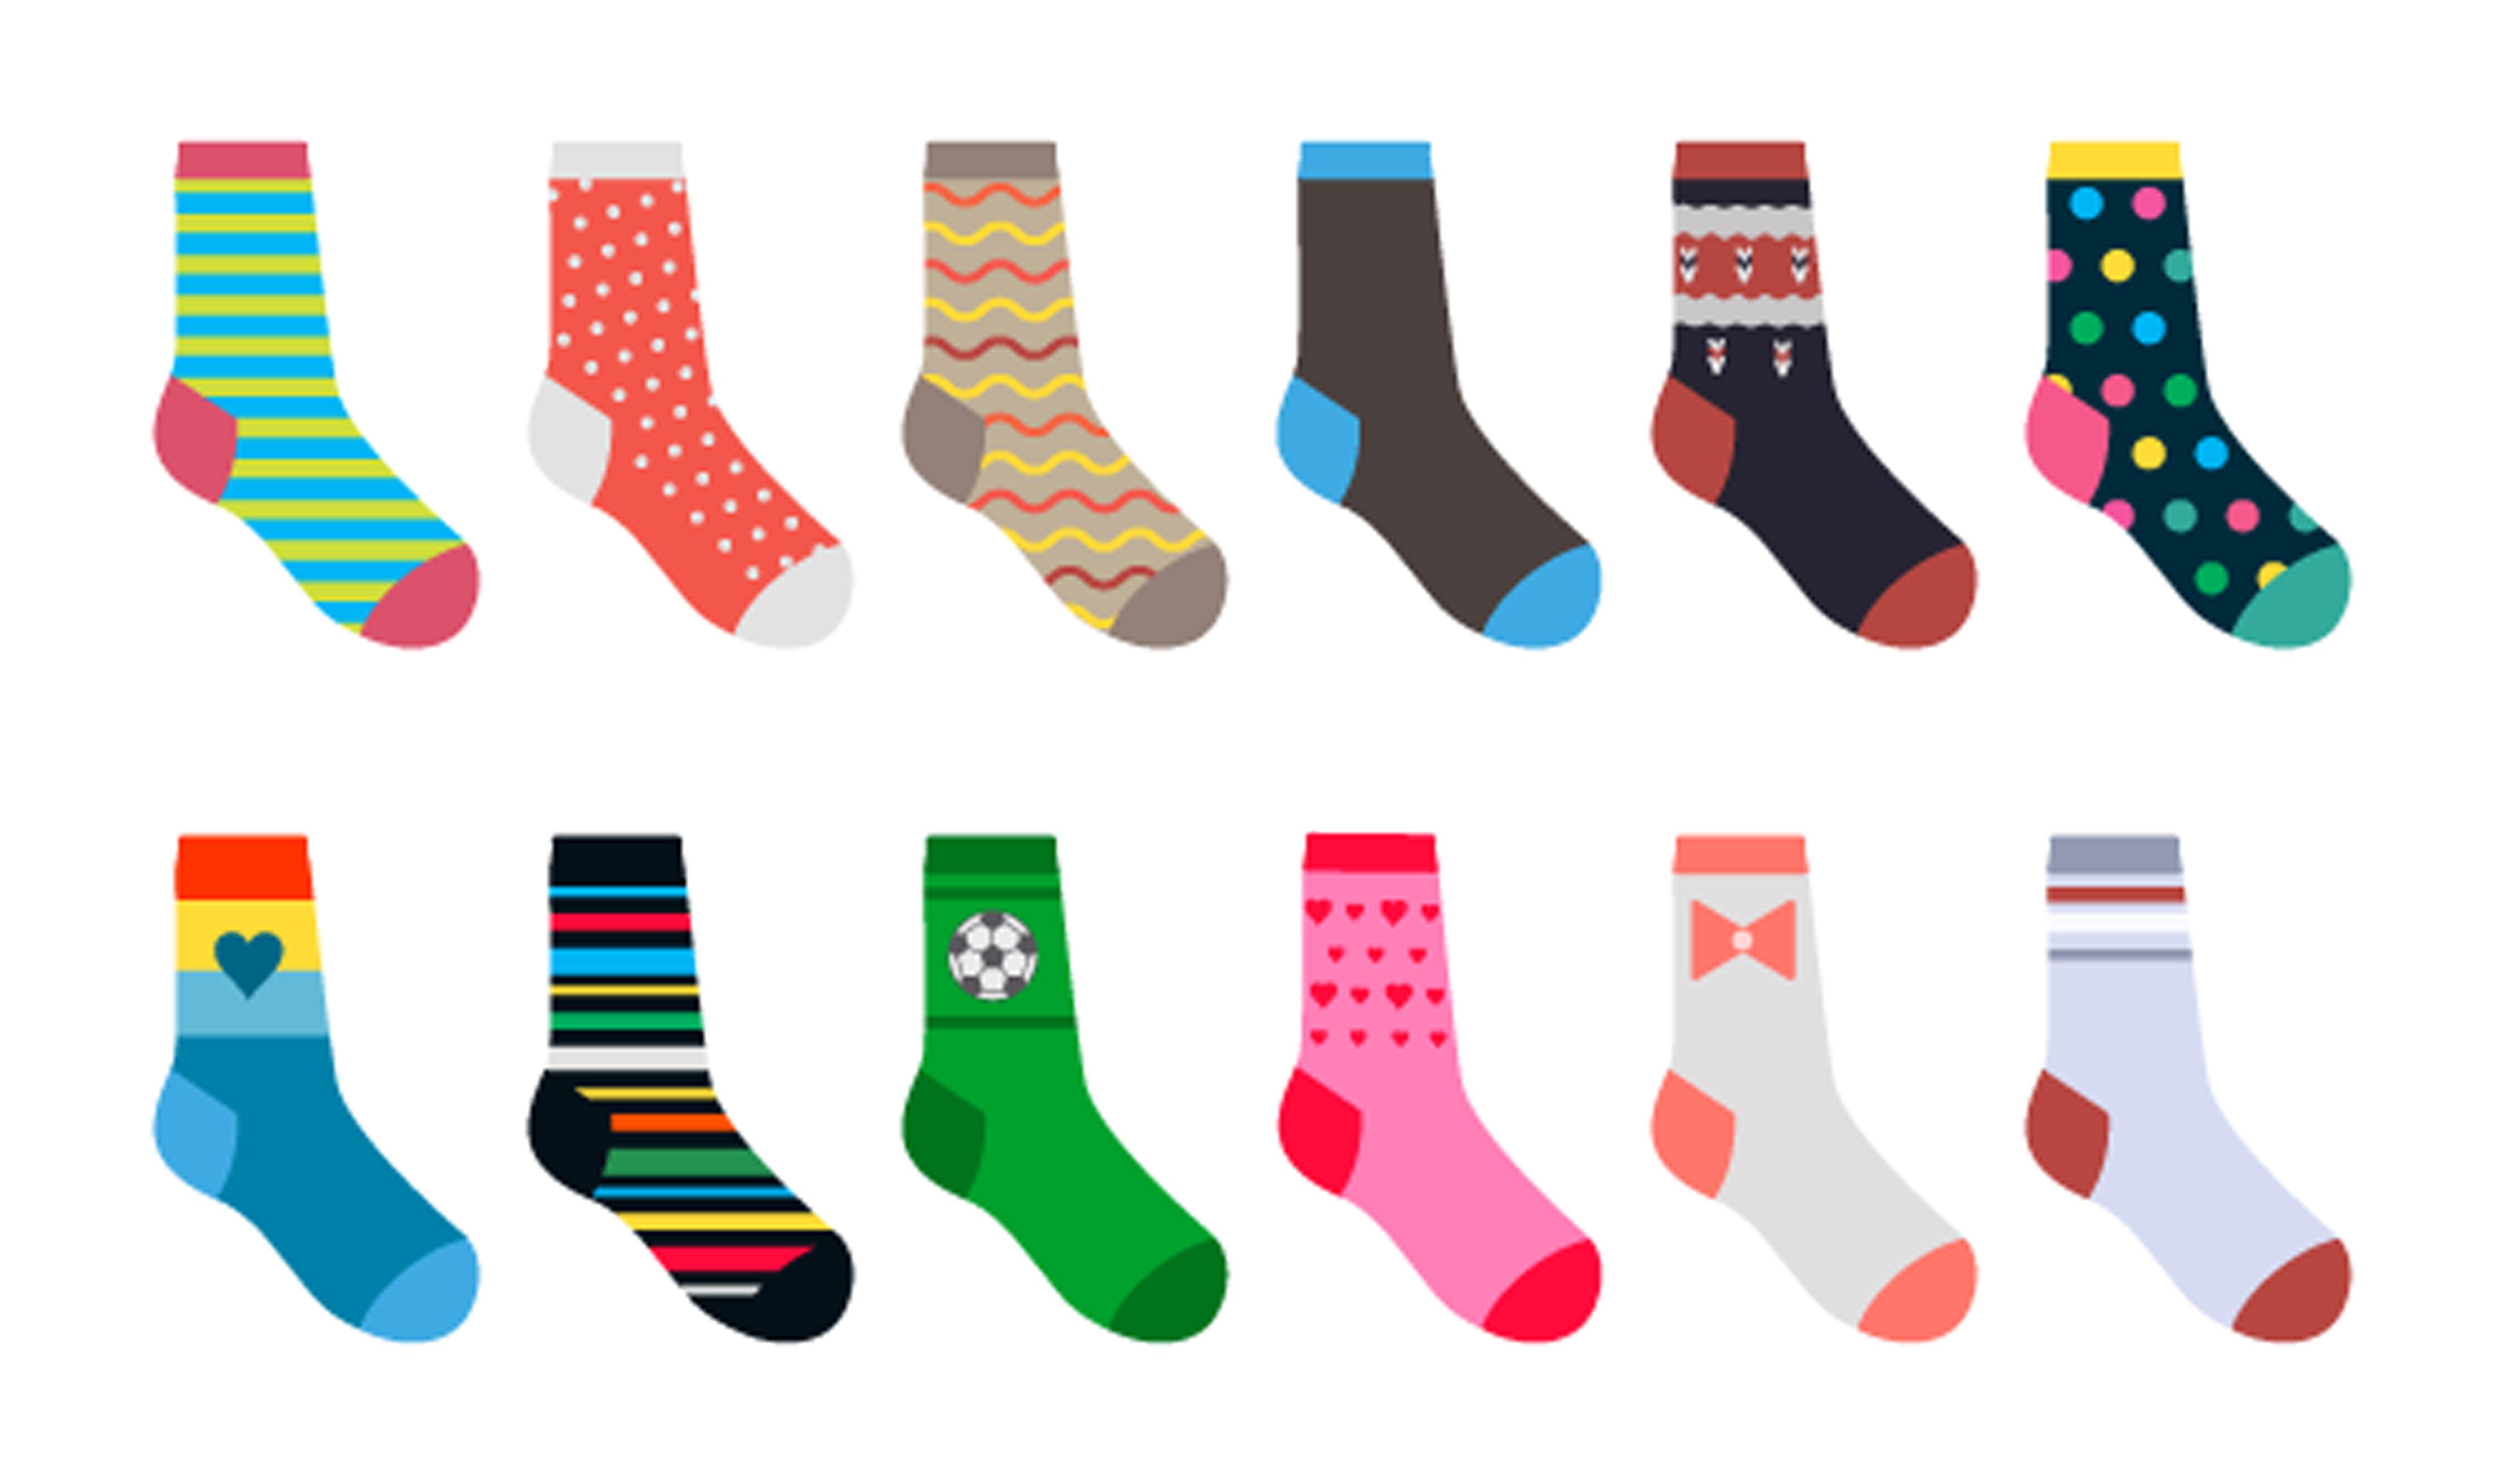 How to choose the right socks?